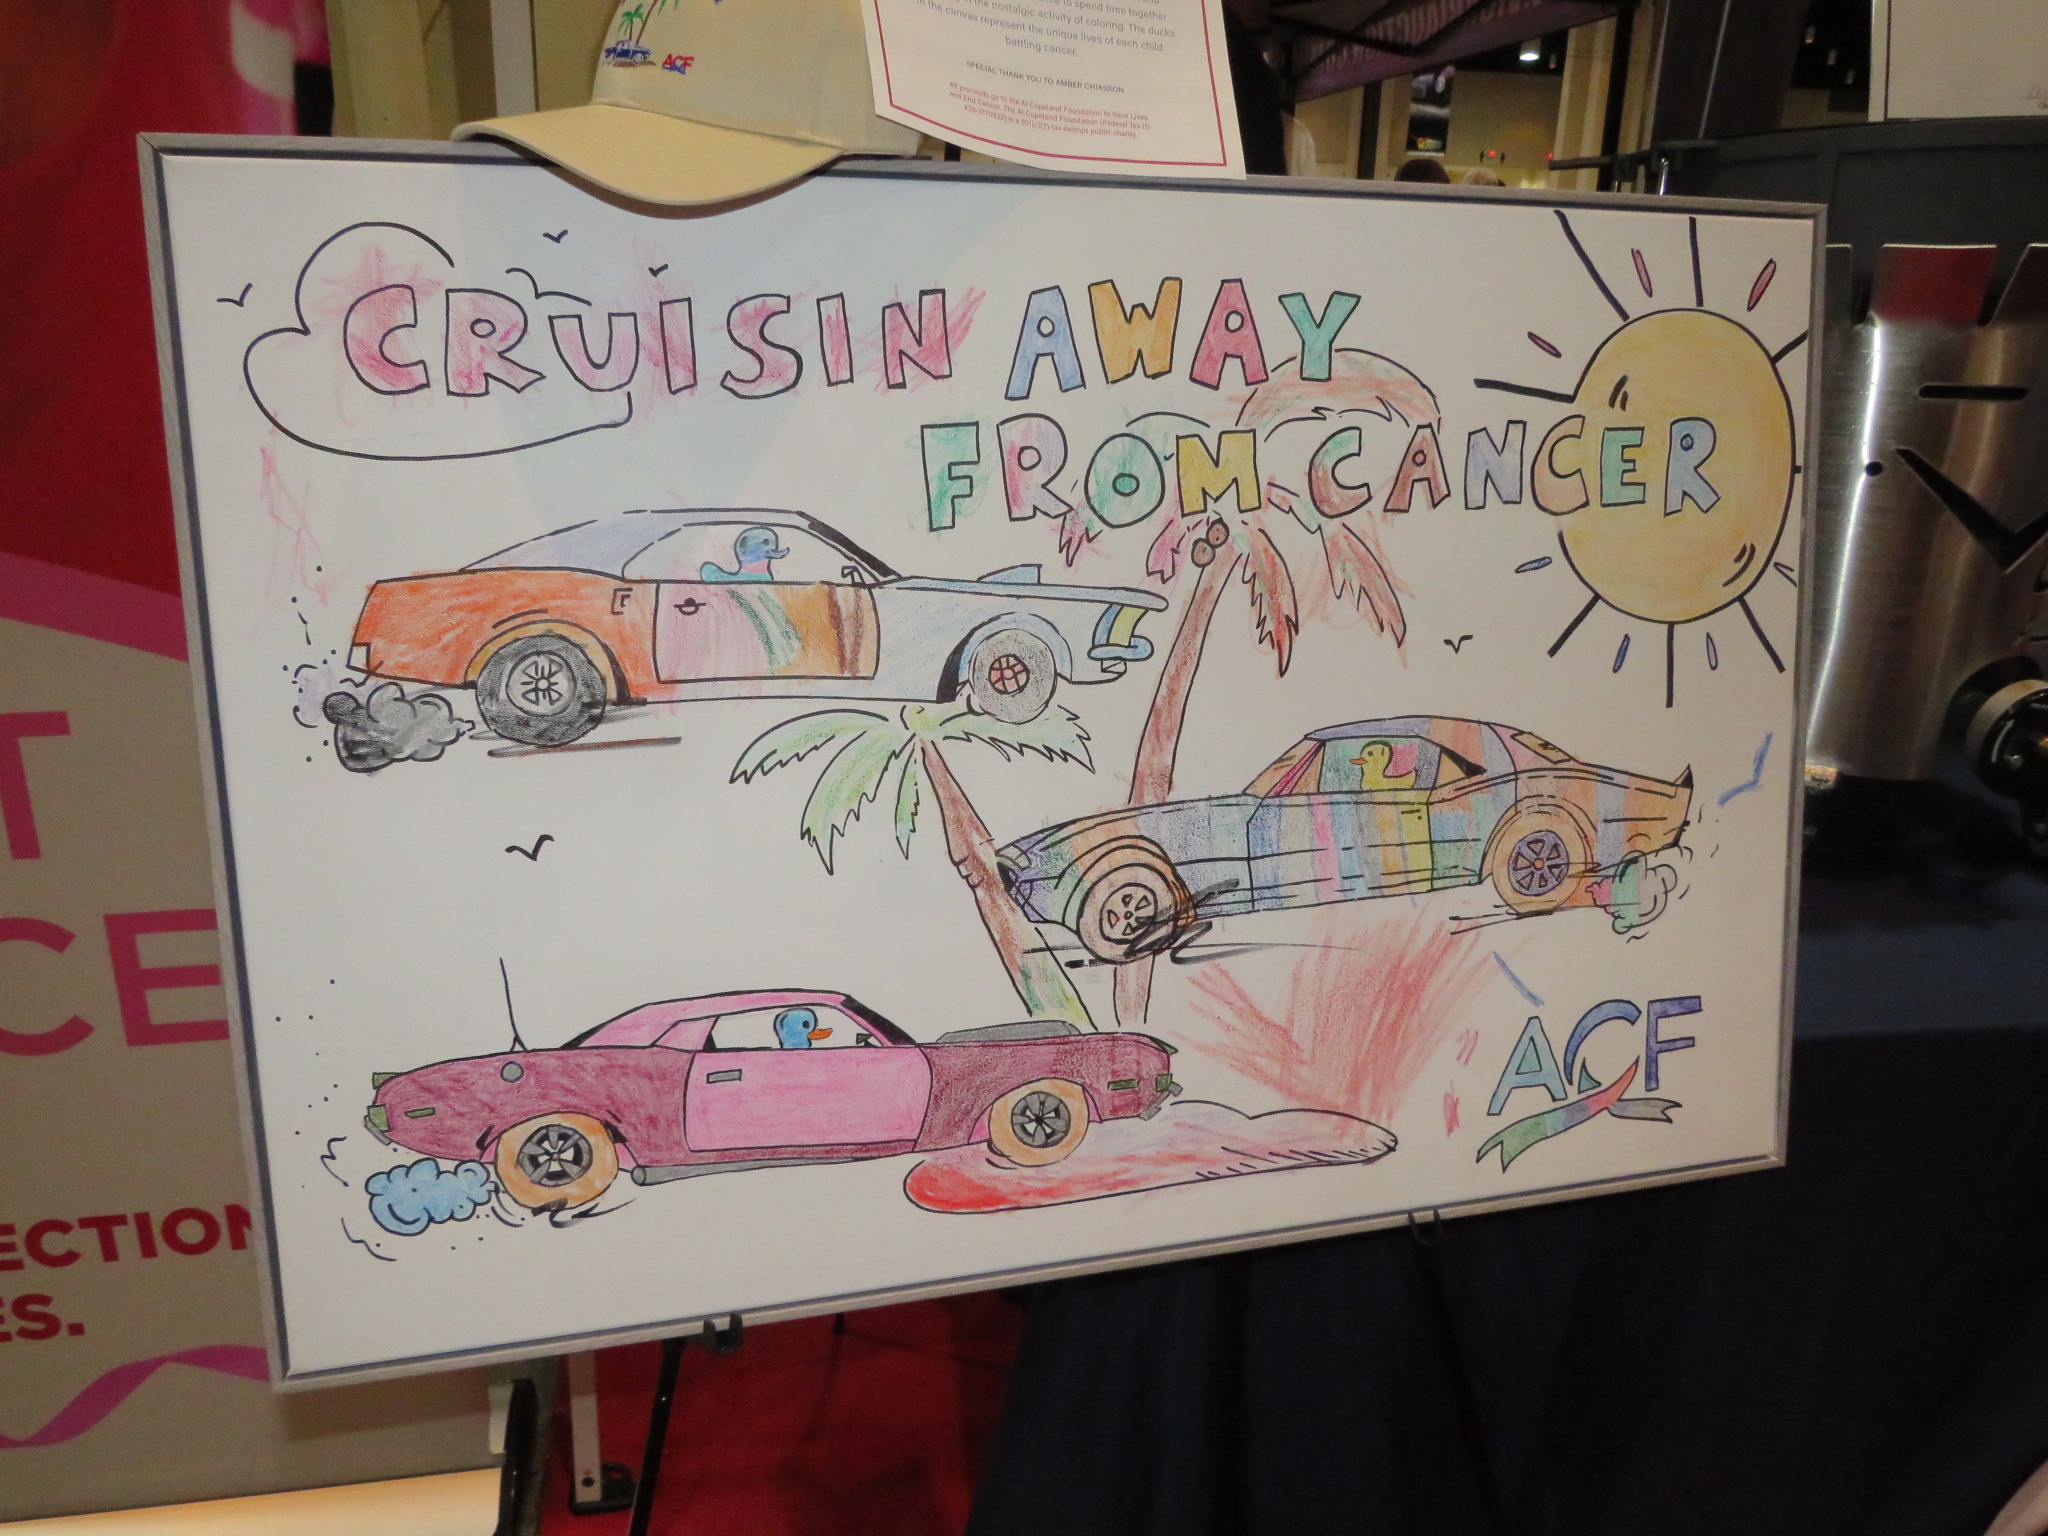 0th Image of a N/A CRUSININ AWAY FROM CANCER-CANVAS